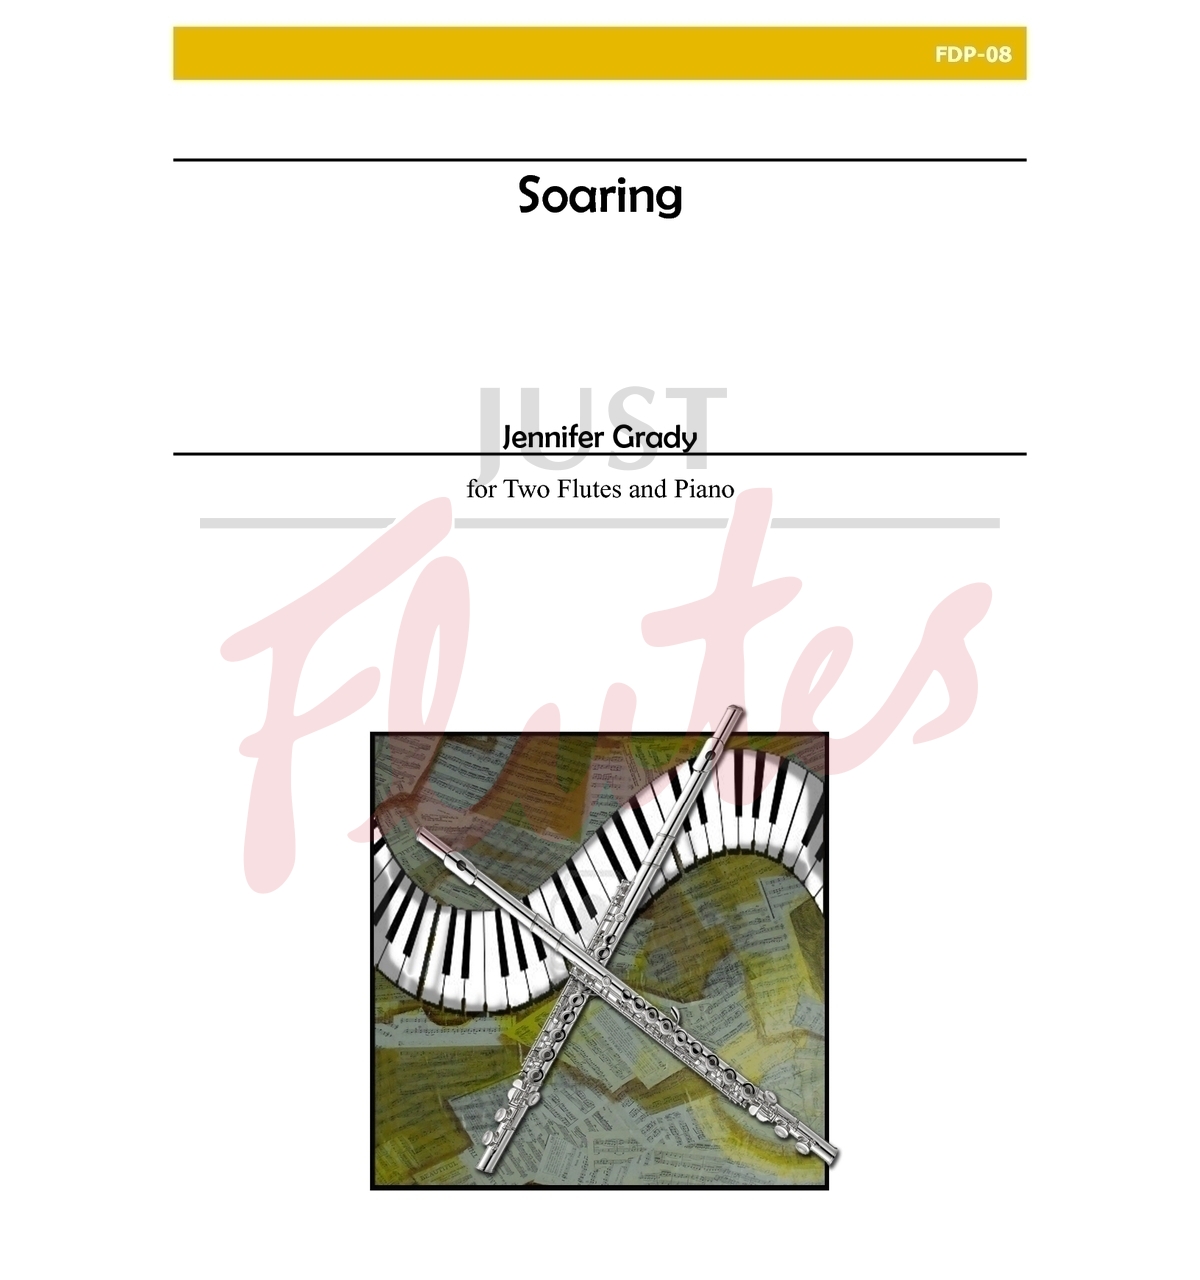 Soaring for Two Flutes and Piano